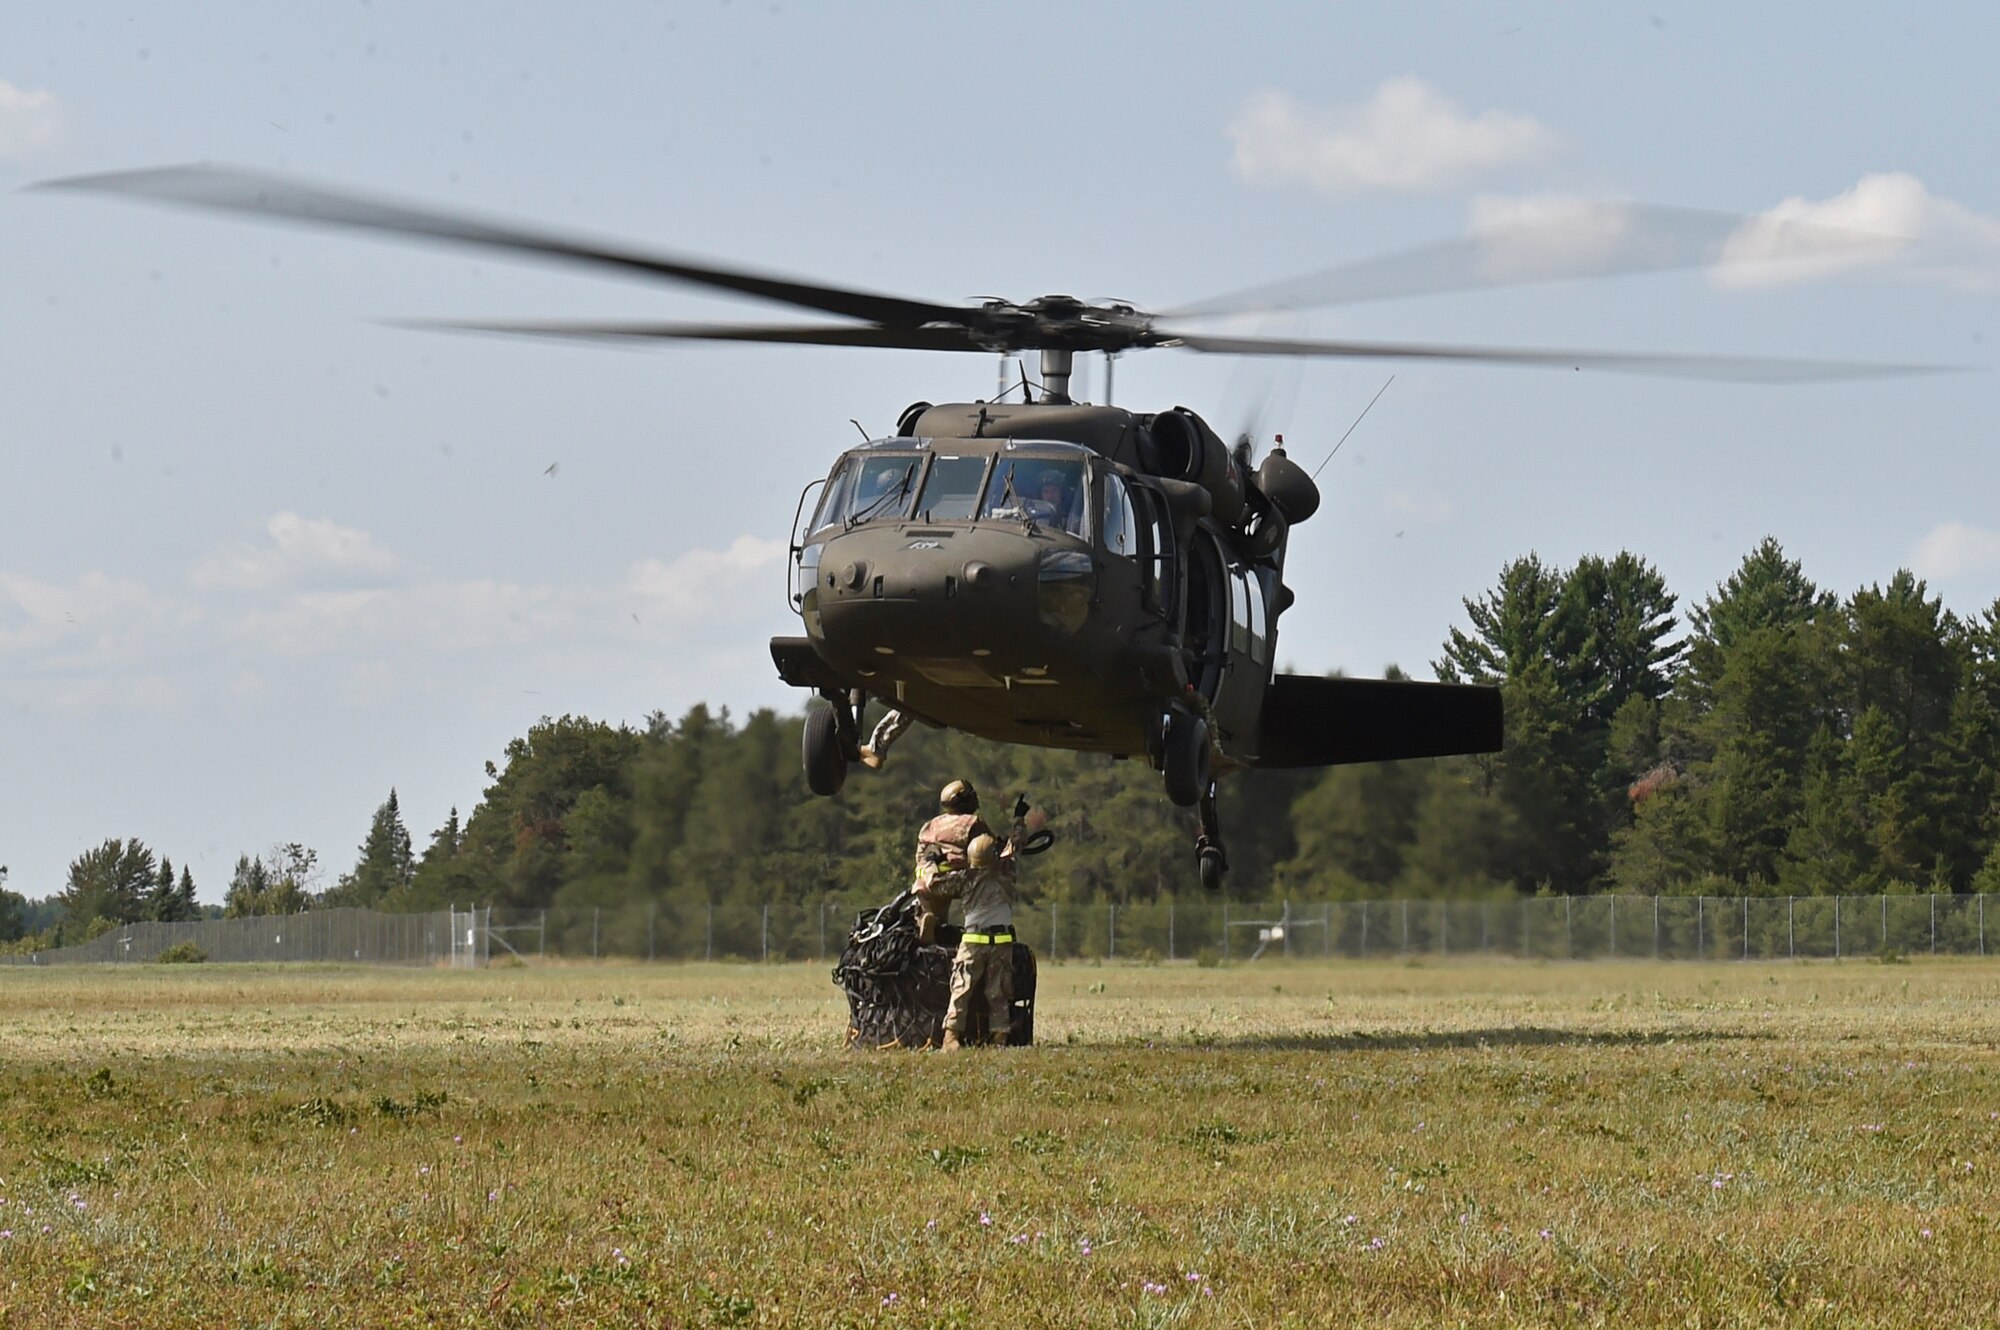 Contingency Response Airmen assigned to the 621st Contingency Response Wing from Travis Air Force Base, Calif., secure a cargo load to a UH-60 Blackhawk helicopter during exercise Northern Strike at Alpena Combat Readiness Training Center, Mich., Aug. 8. Northern Strike is a robust military readiness exercise coordinated by the Michigan Army National Guard which features joint and multi-national militaries working together for total force integration. (U.S. Air Force photo by Tech. Sgt. Liliana Moreno)